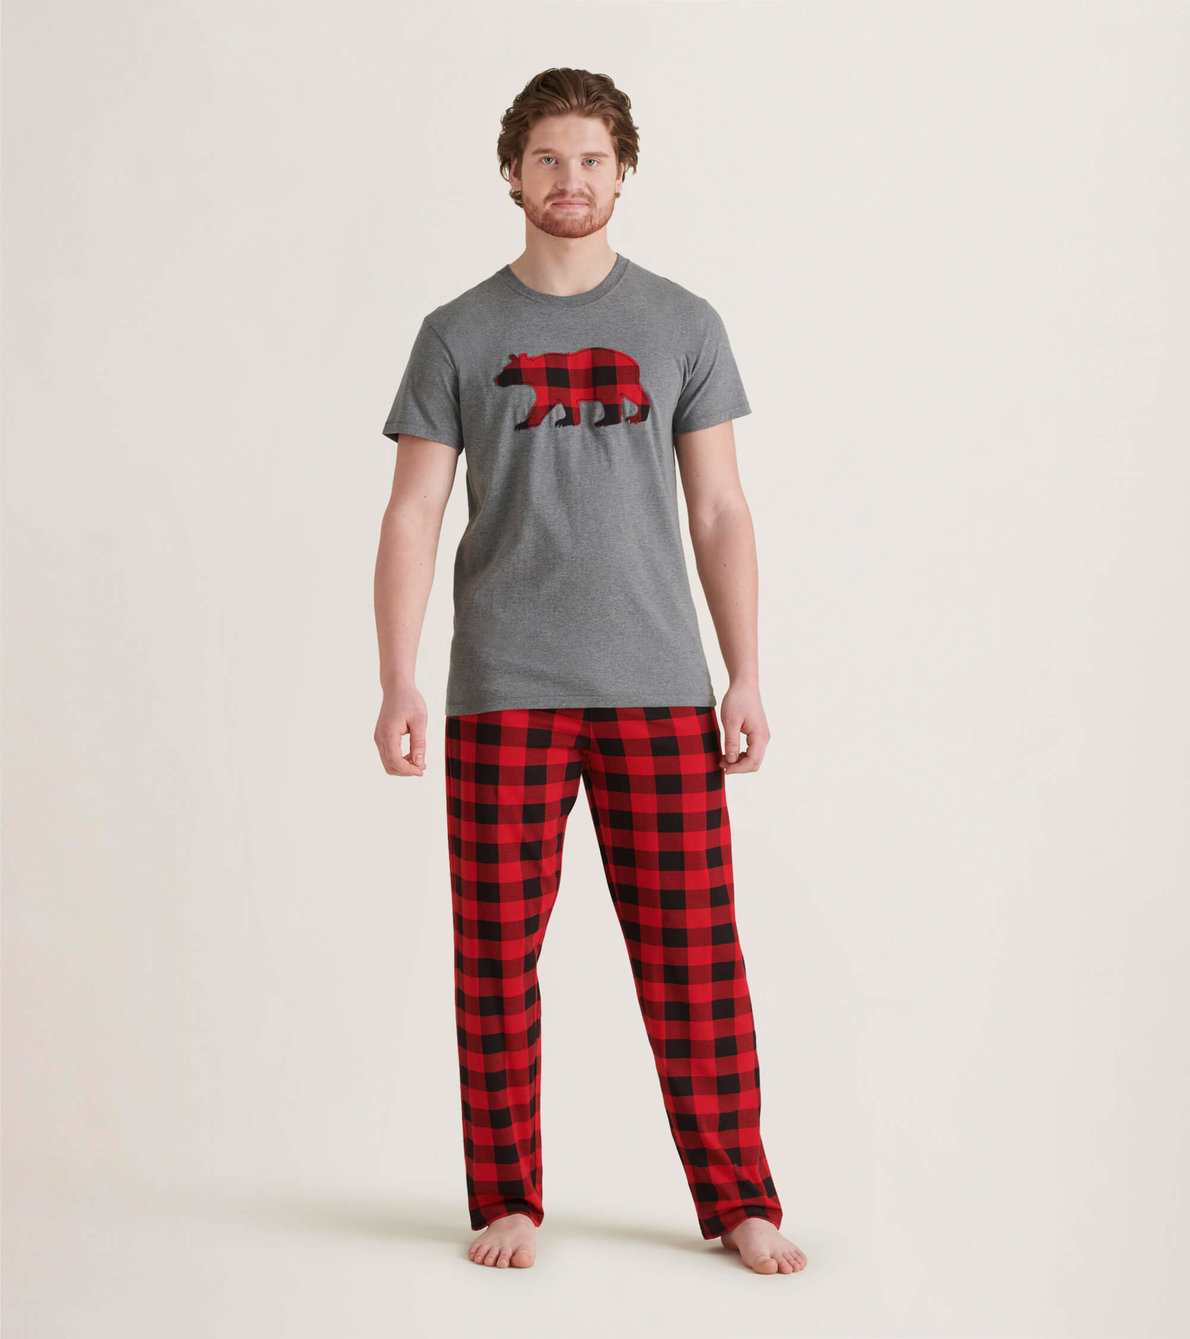 View larger image of Men's Red Plaid Bear T-Shirt